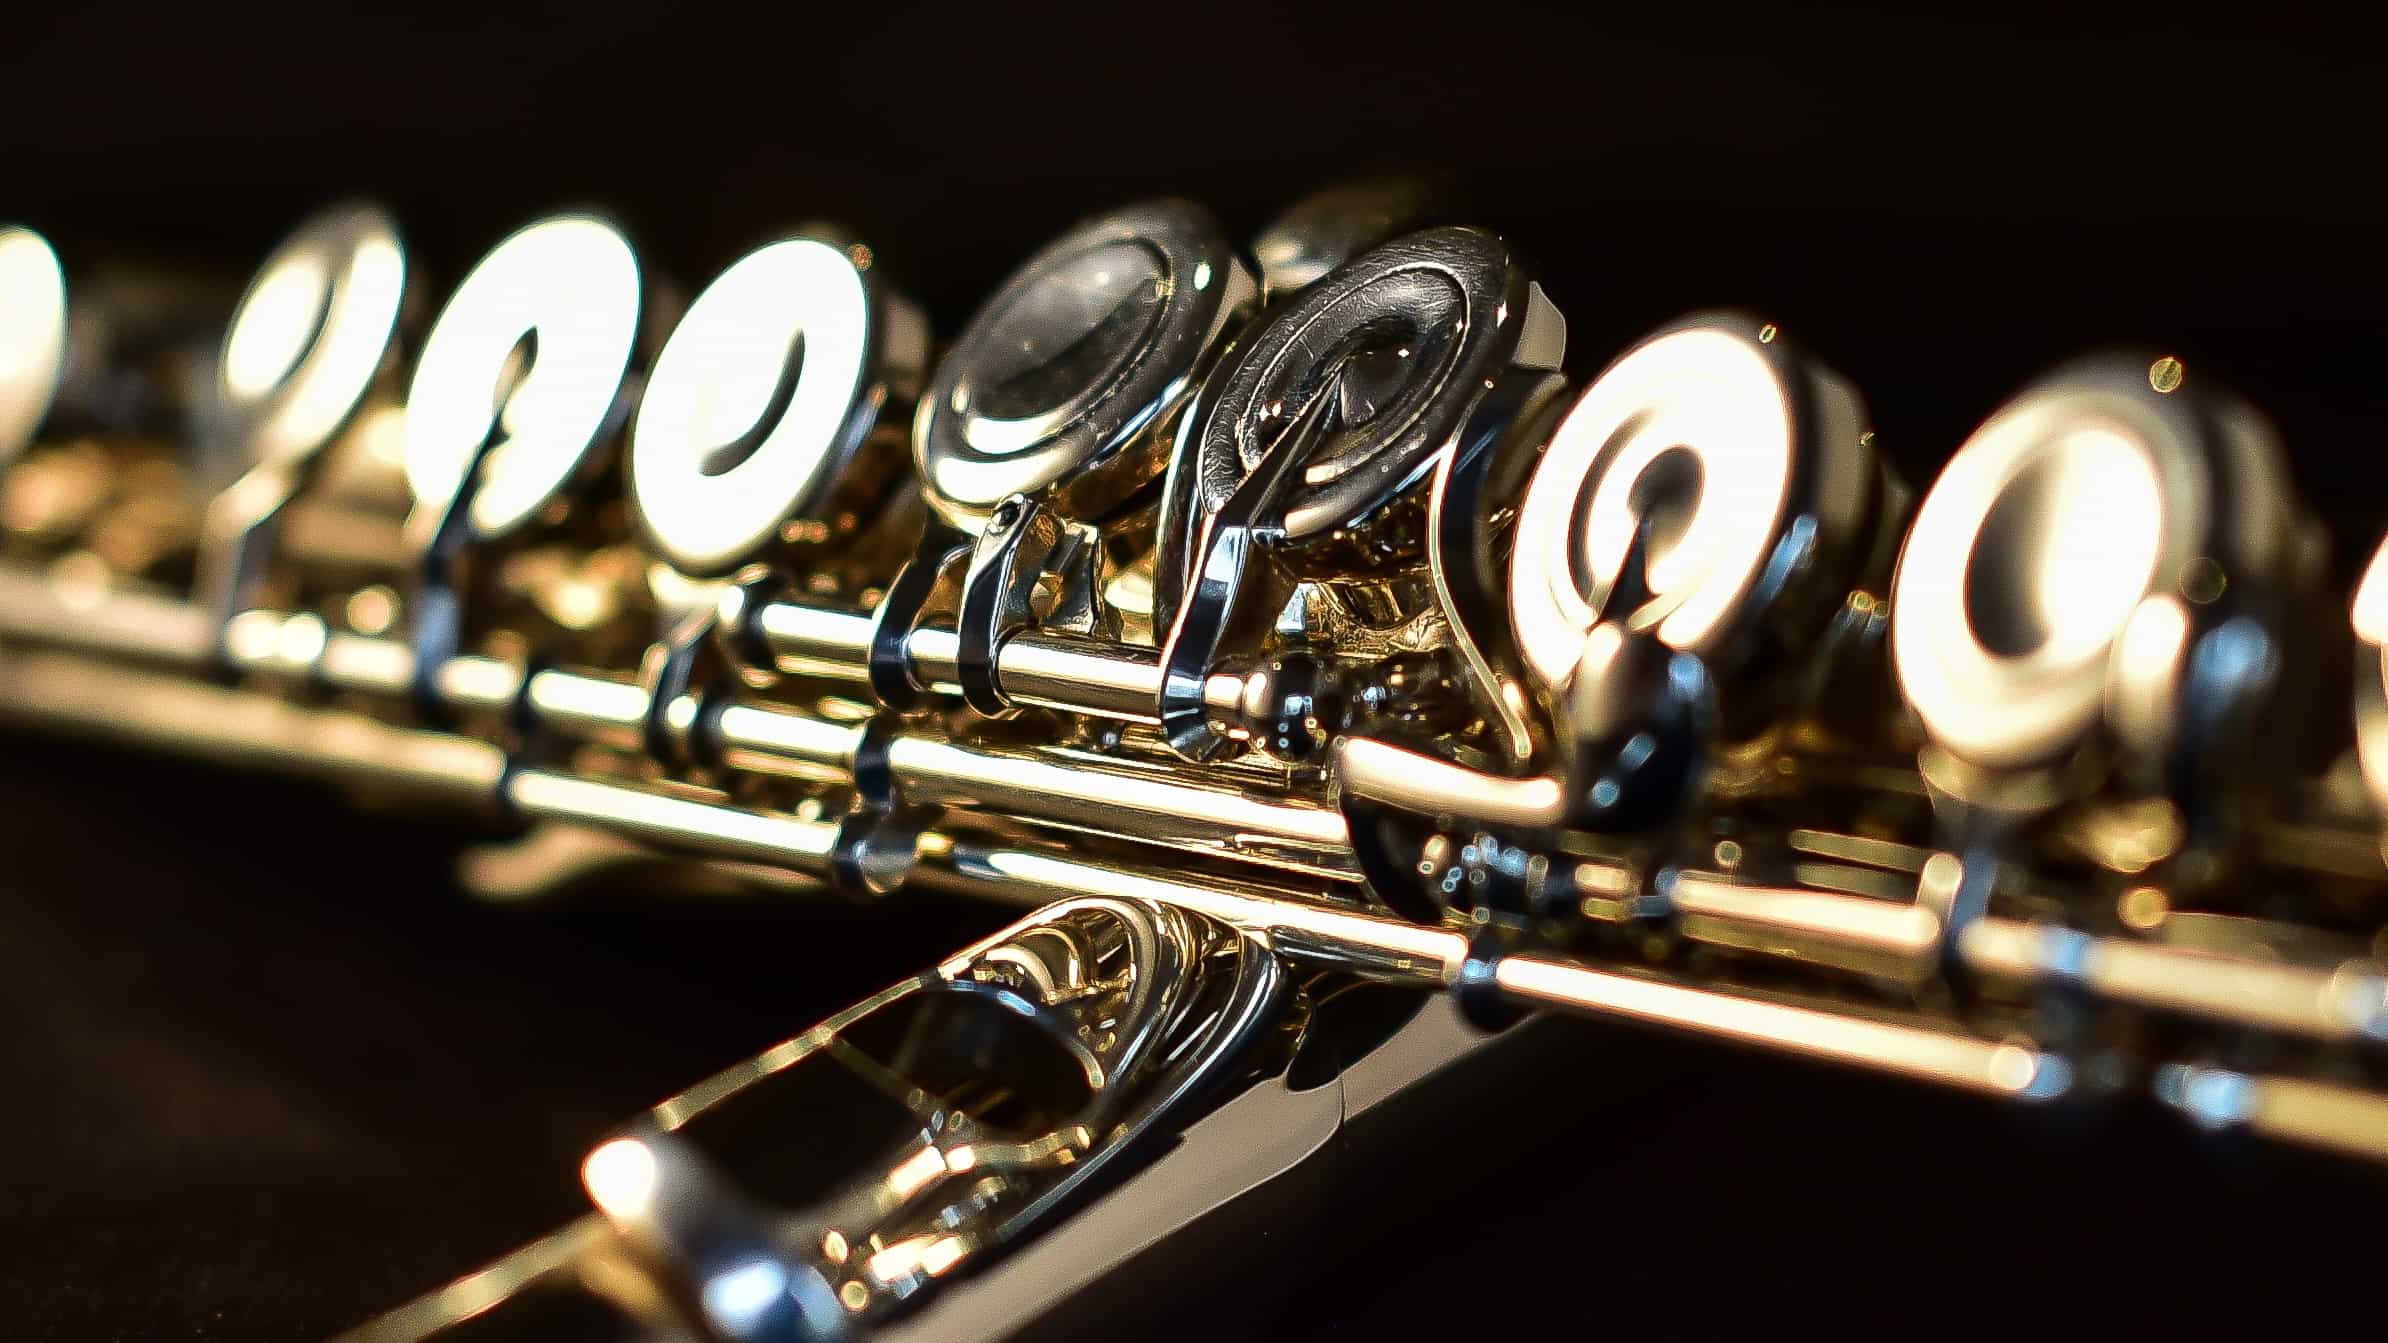 Silver flutes glow against the dark. Creative Commons courtesy photo.